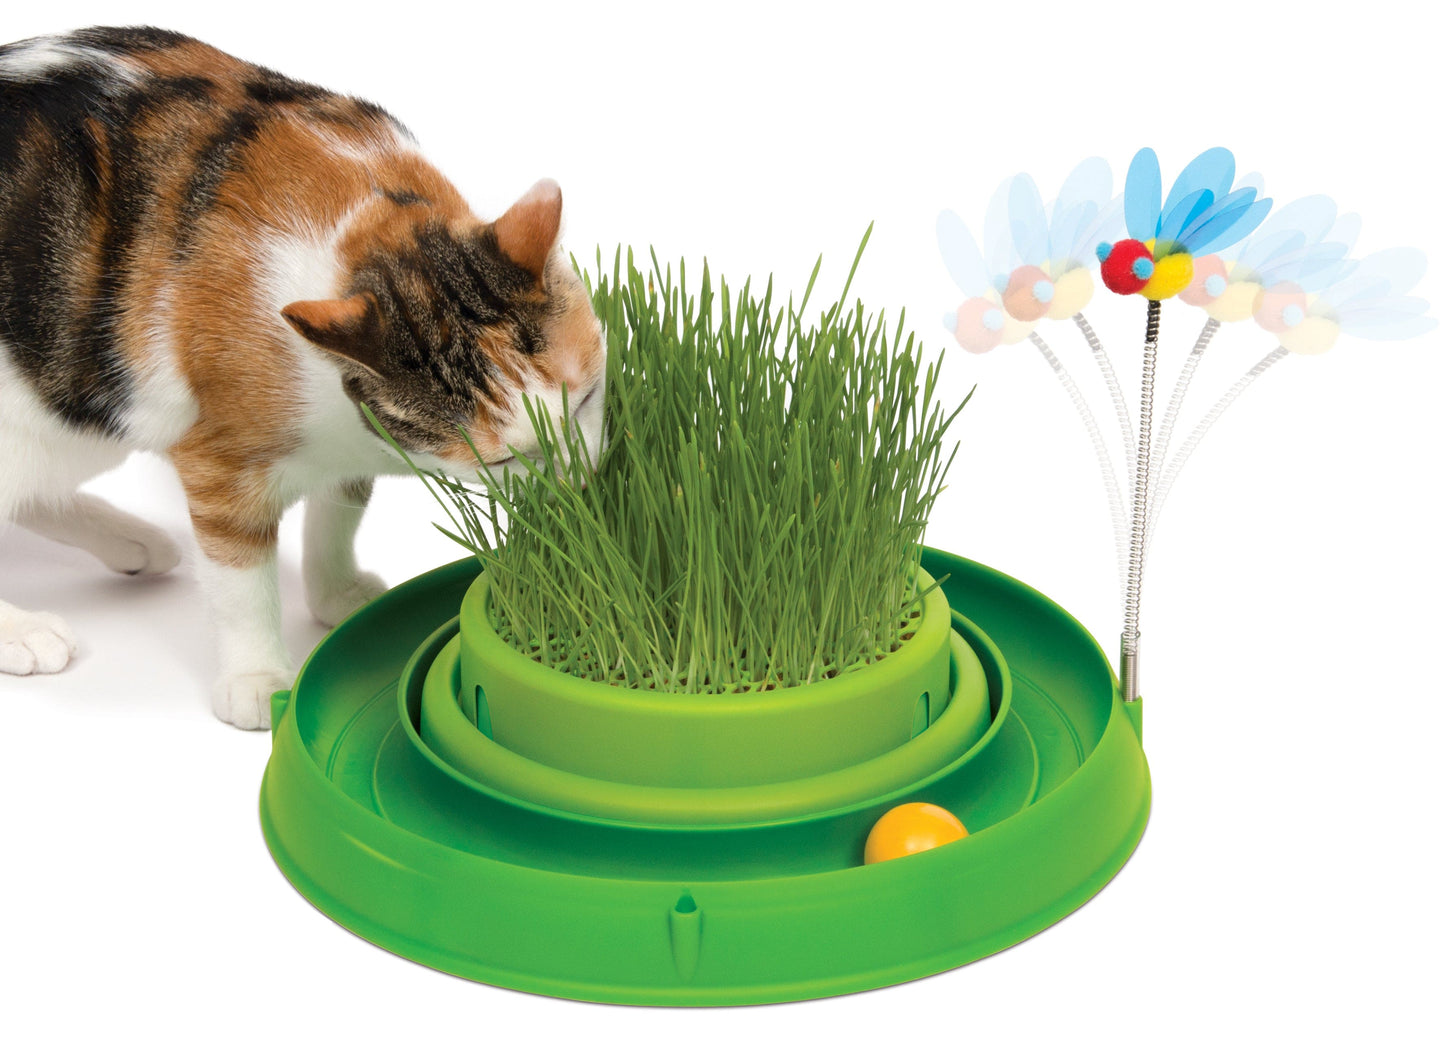 Catit Circuit Ball Toy with Grass Planter